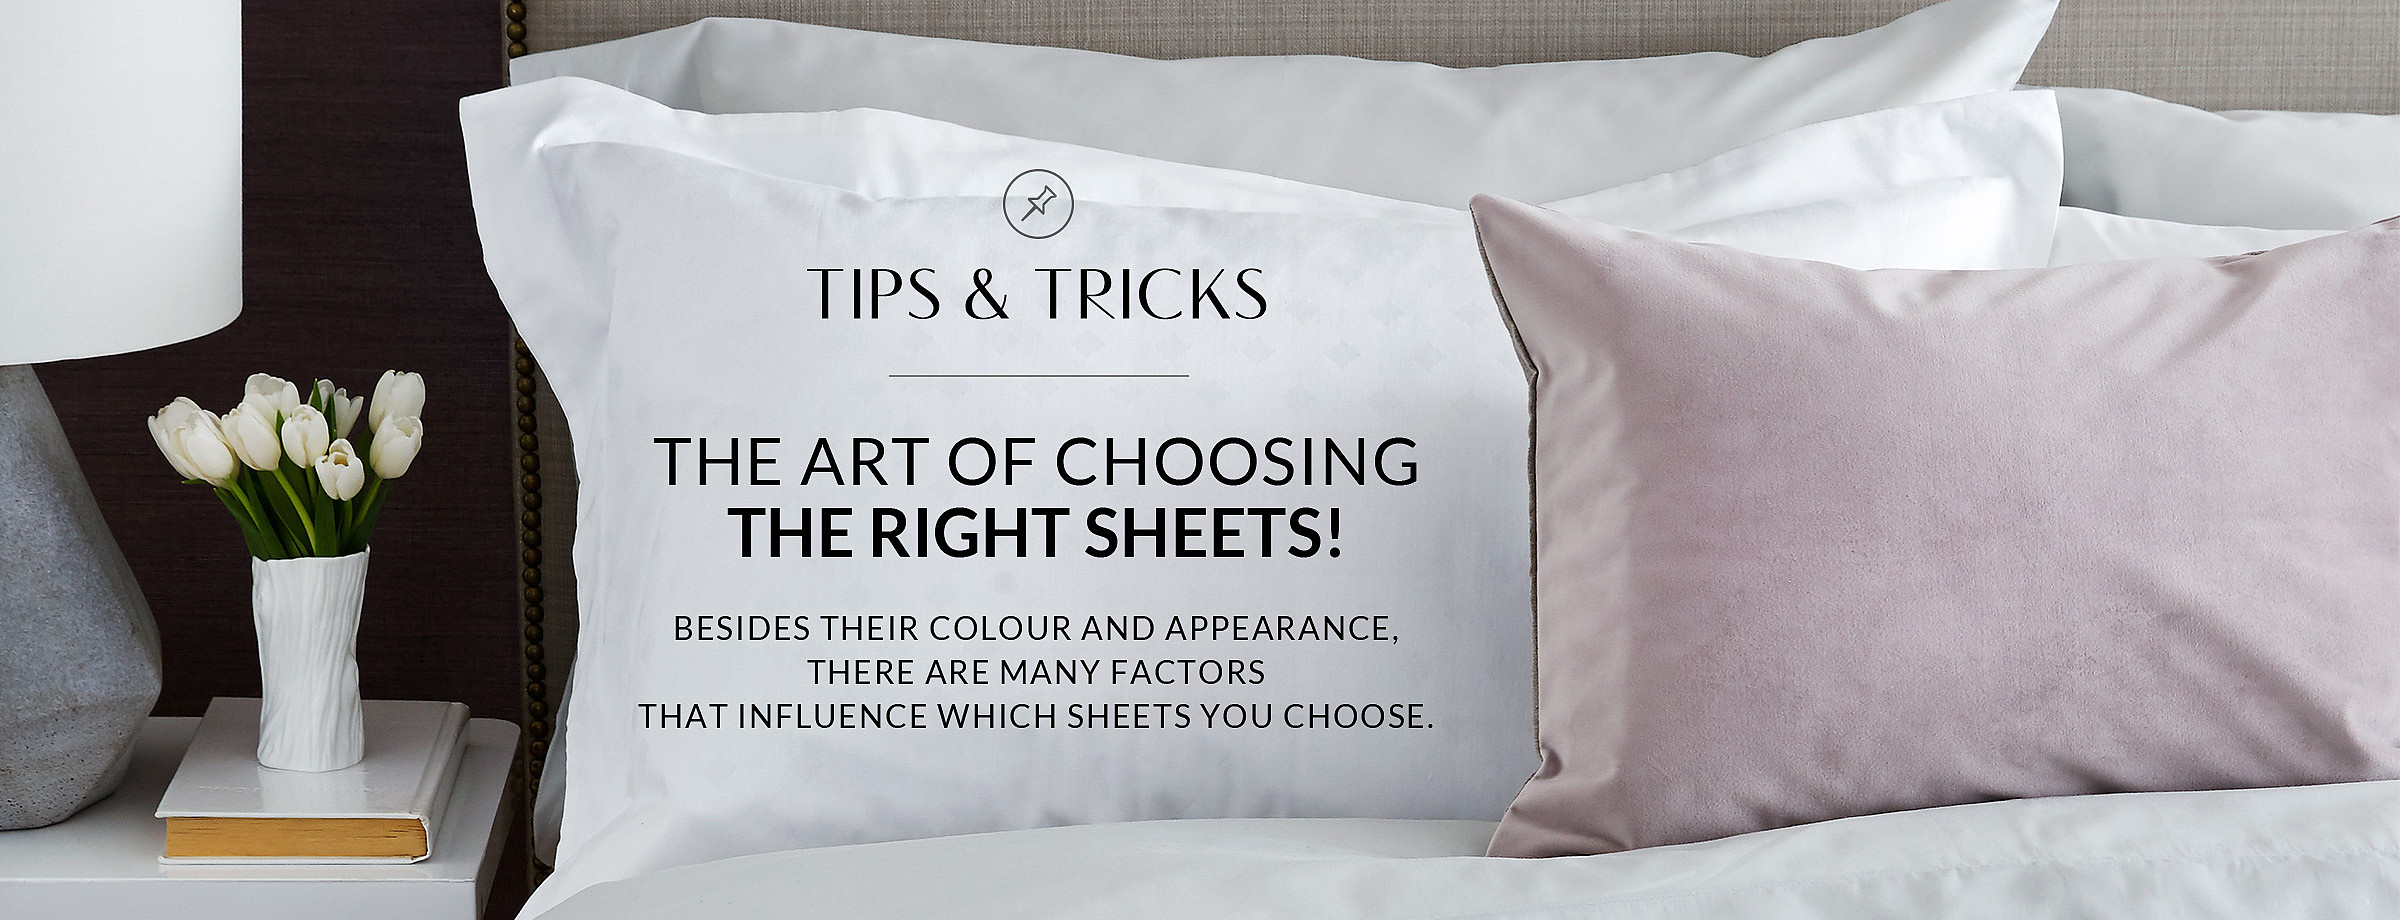 The Right Sheet